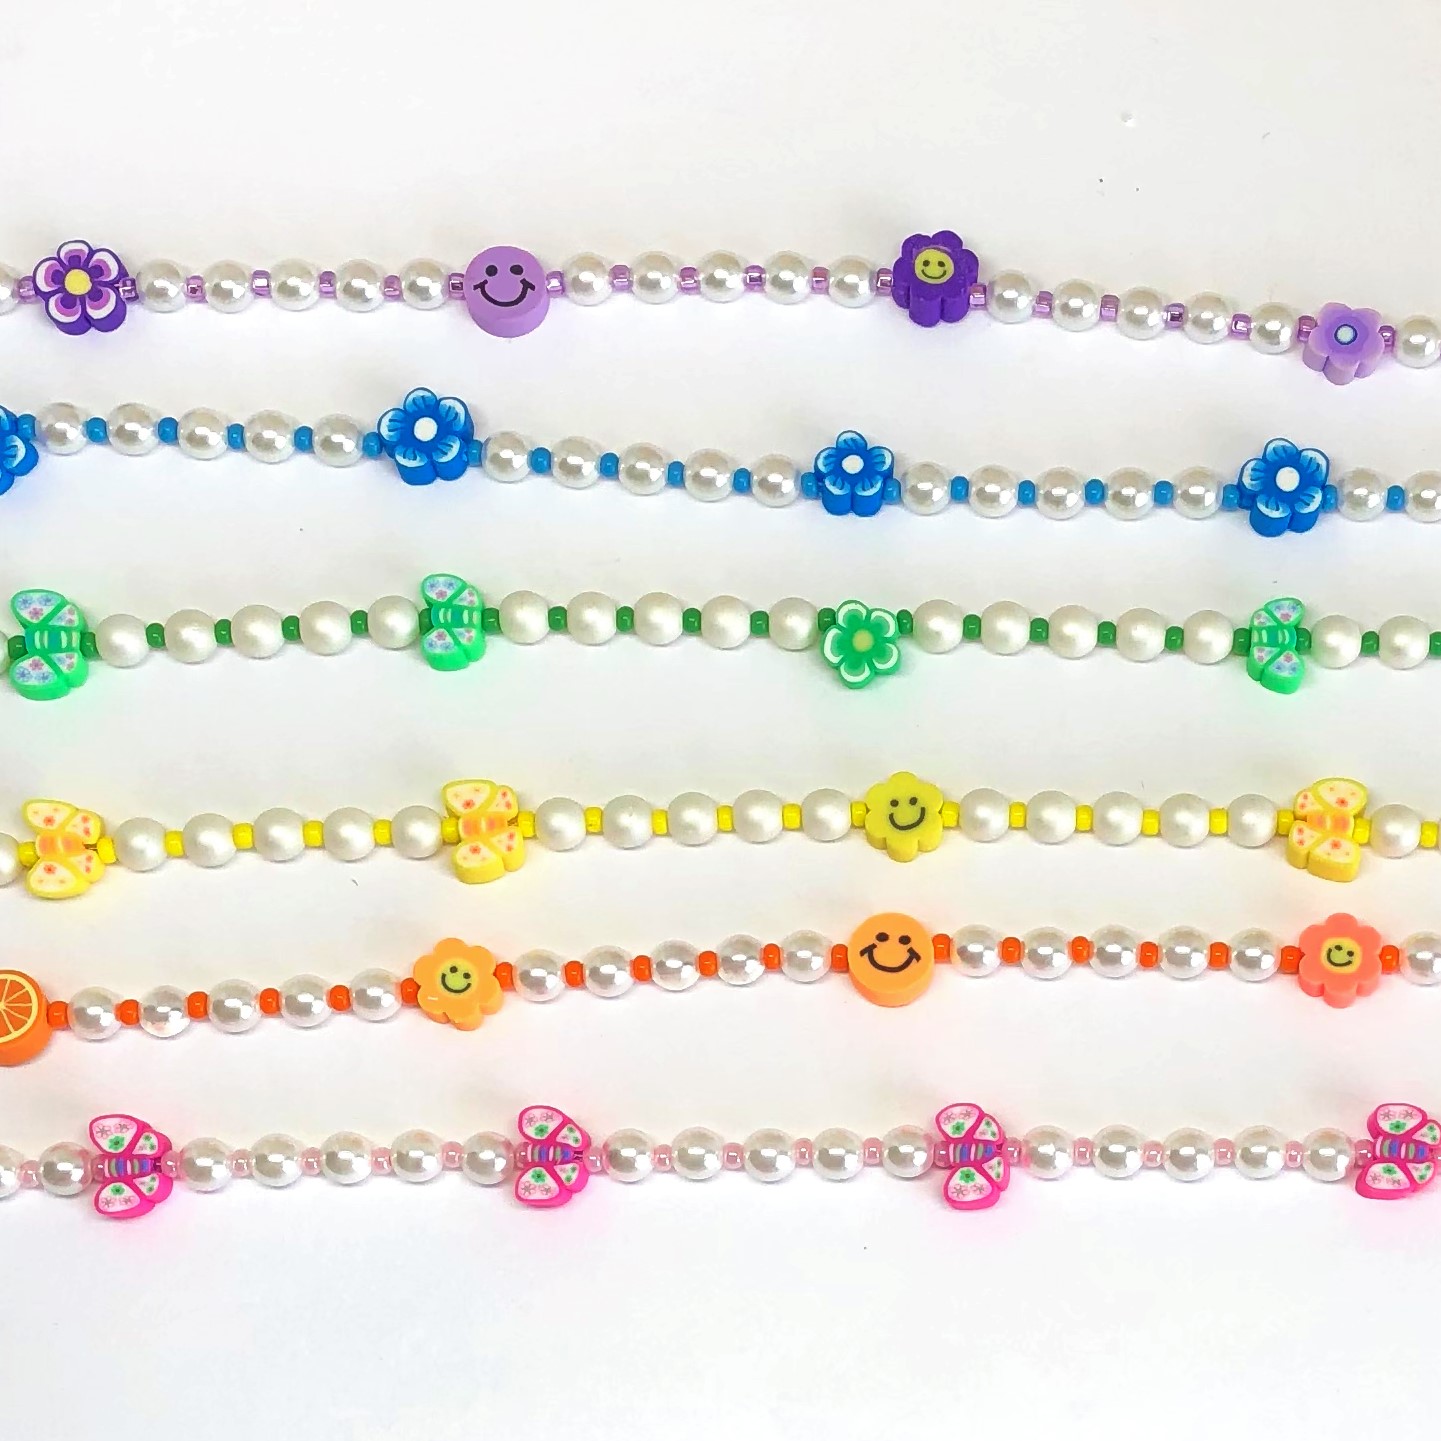 Fun Clay Beads and Czech Glass Pearl Beaded Necklace Jewelry